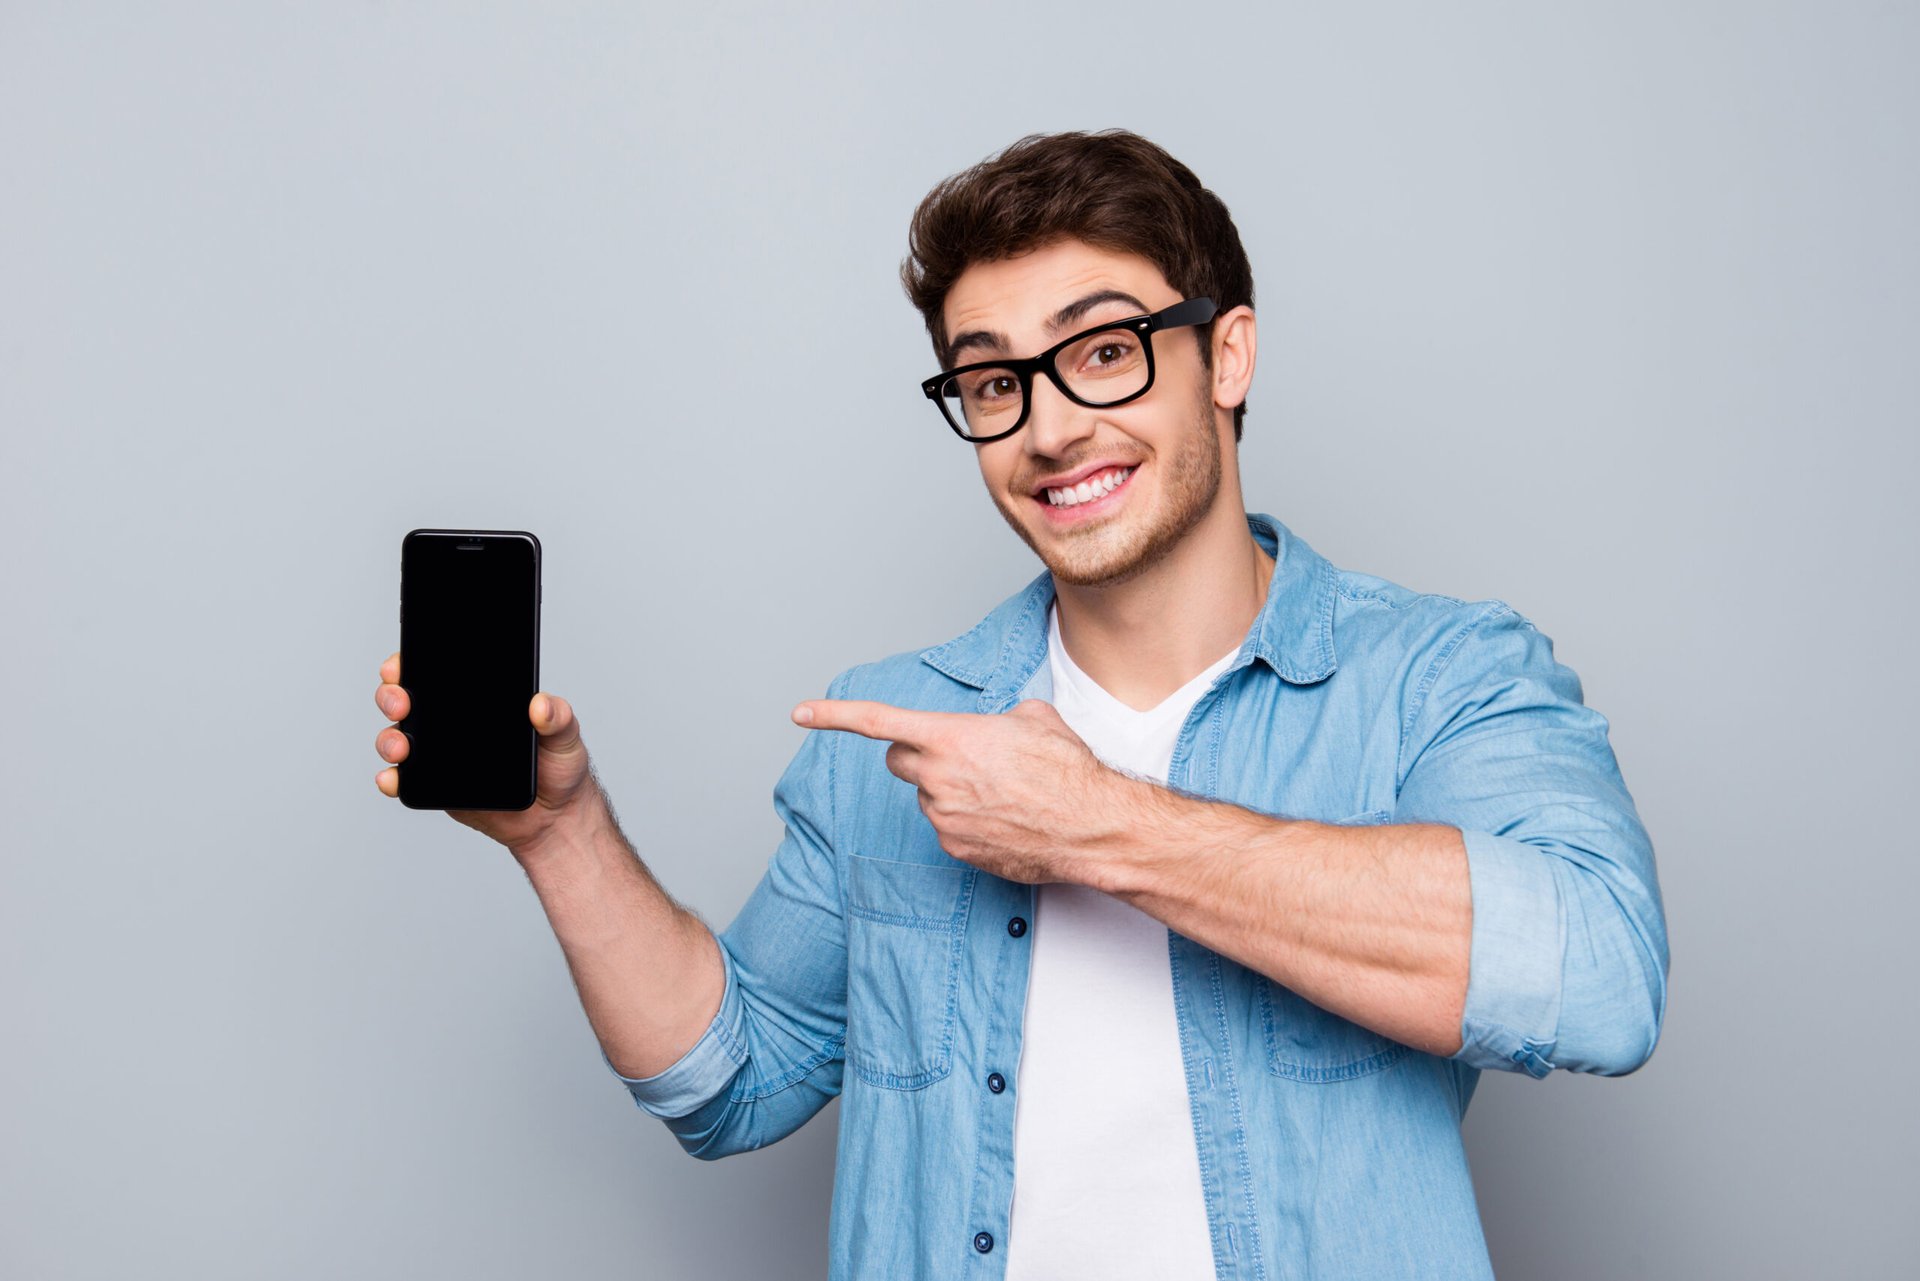 Man excited about his smartphone plan